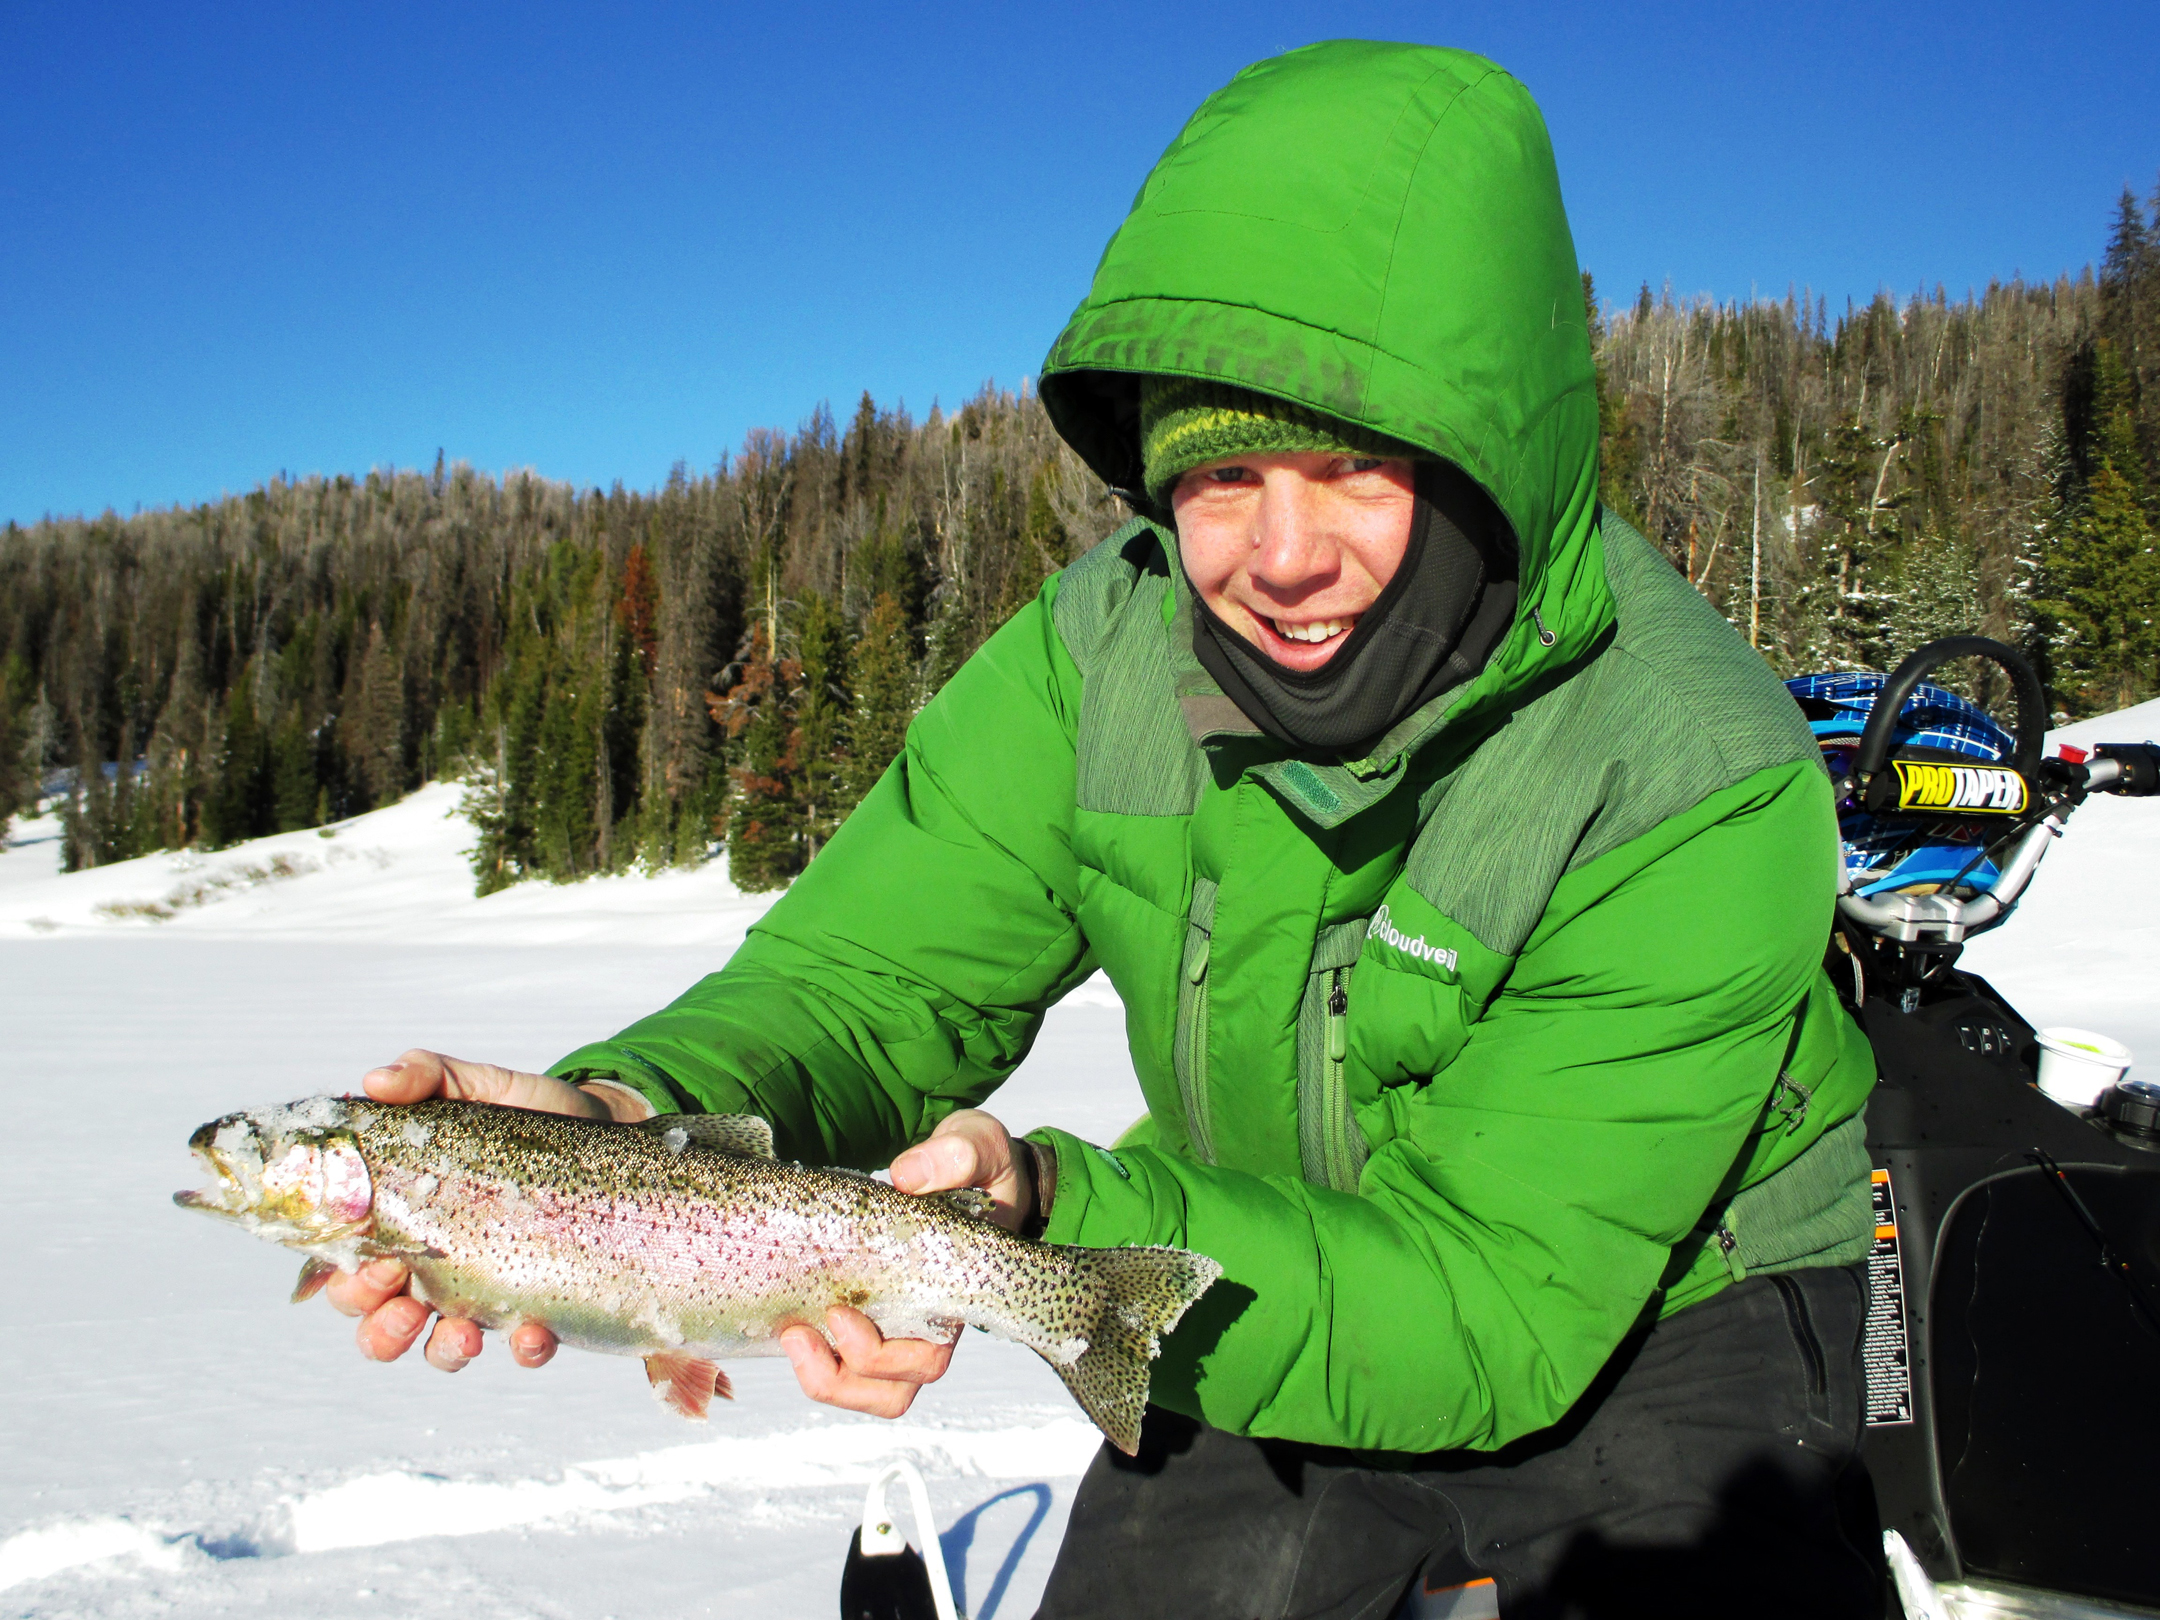 Ice fishing is another activity for guests to enjoy at Brooks Lake Lodge, nestled in the Shoshone National Forest near Jackson Hole, Wyoming, and Yellowstone National Park.